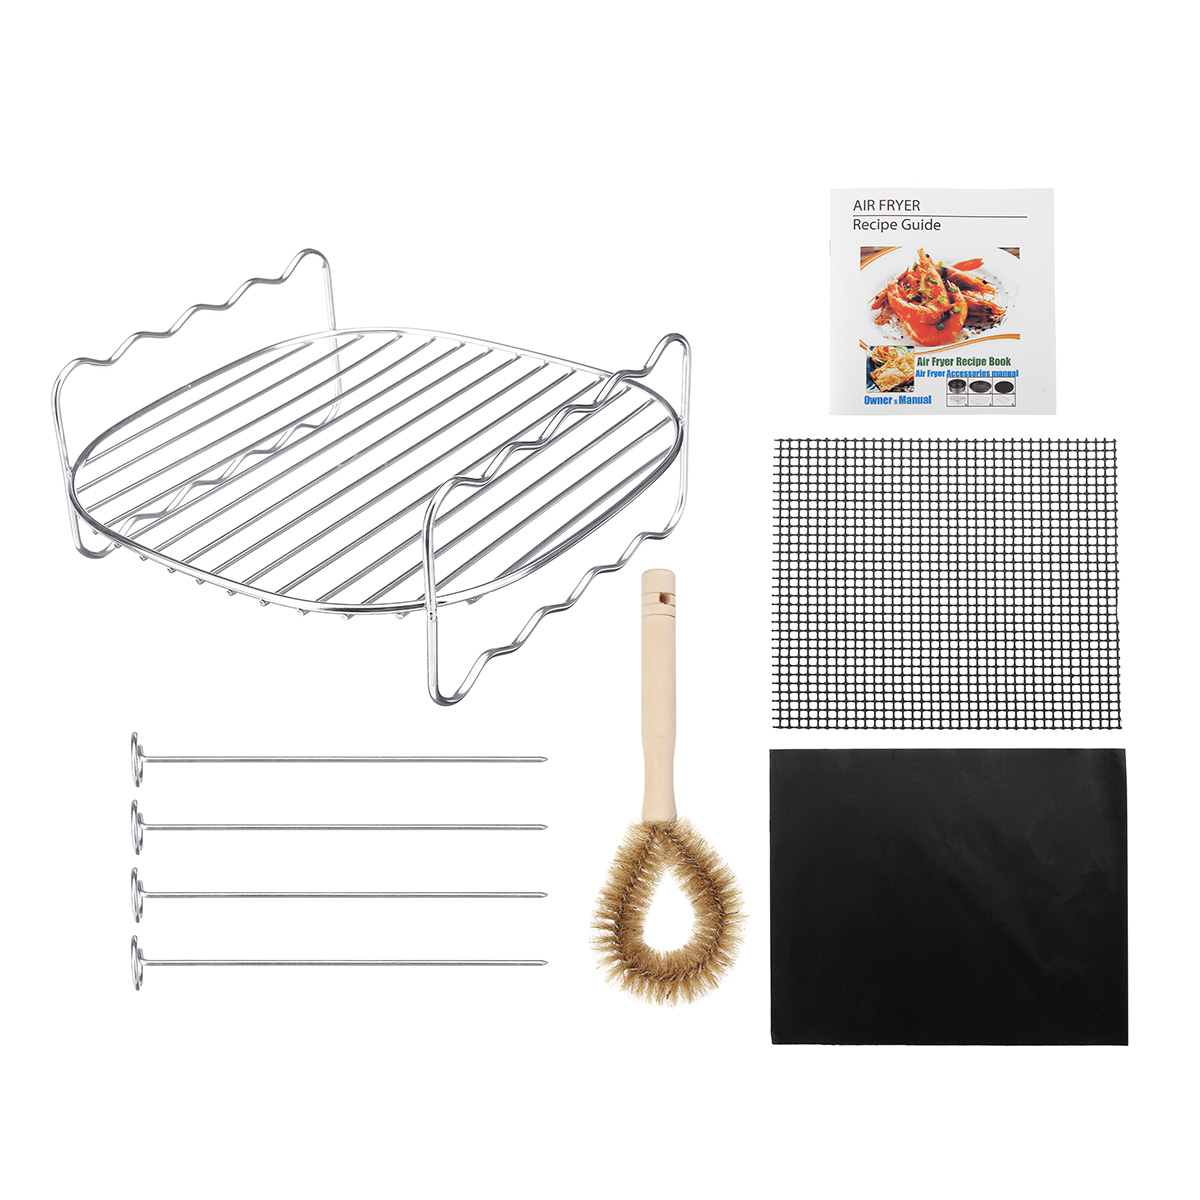 

Stainless Steel Air Fryer Baking Tray BBQ Grill Rack w/ Skewers Brush for Cooking Grilling Drying